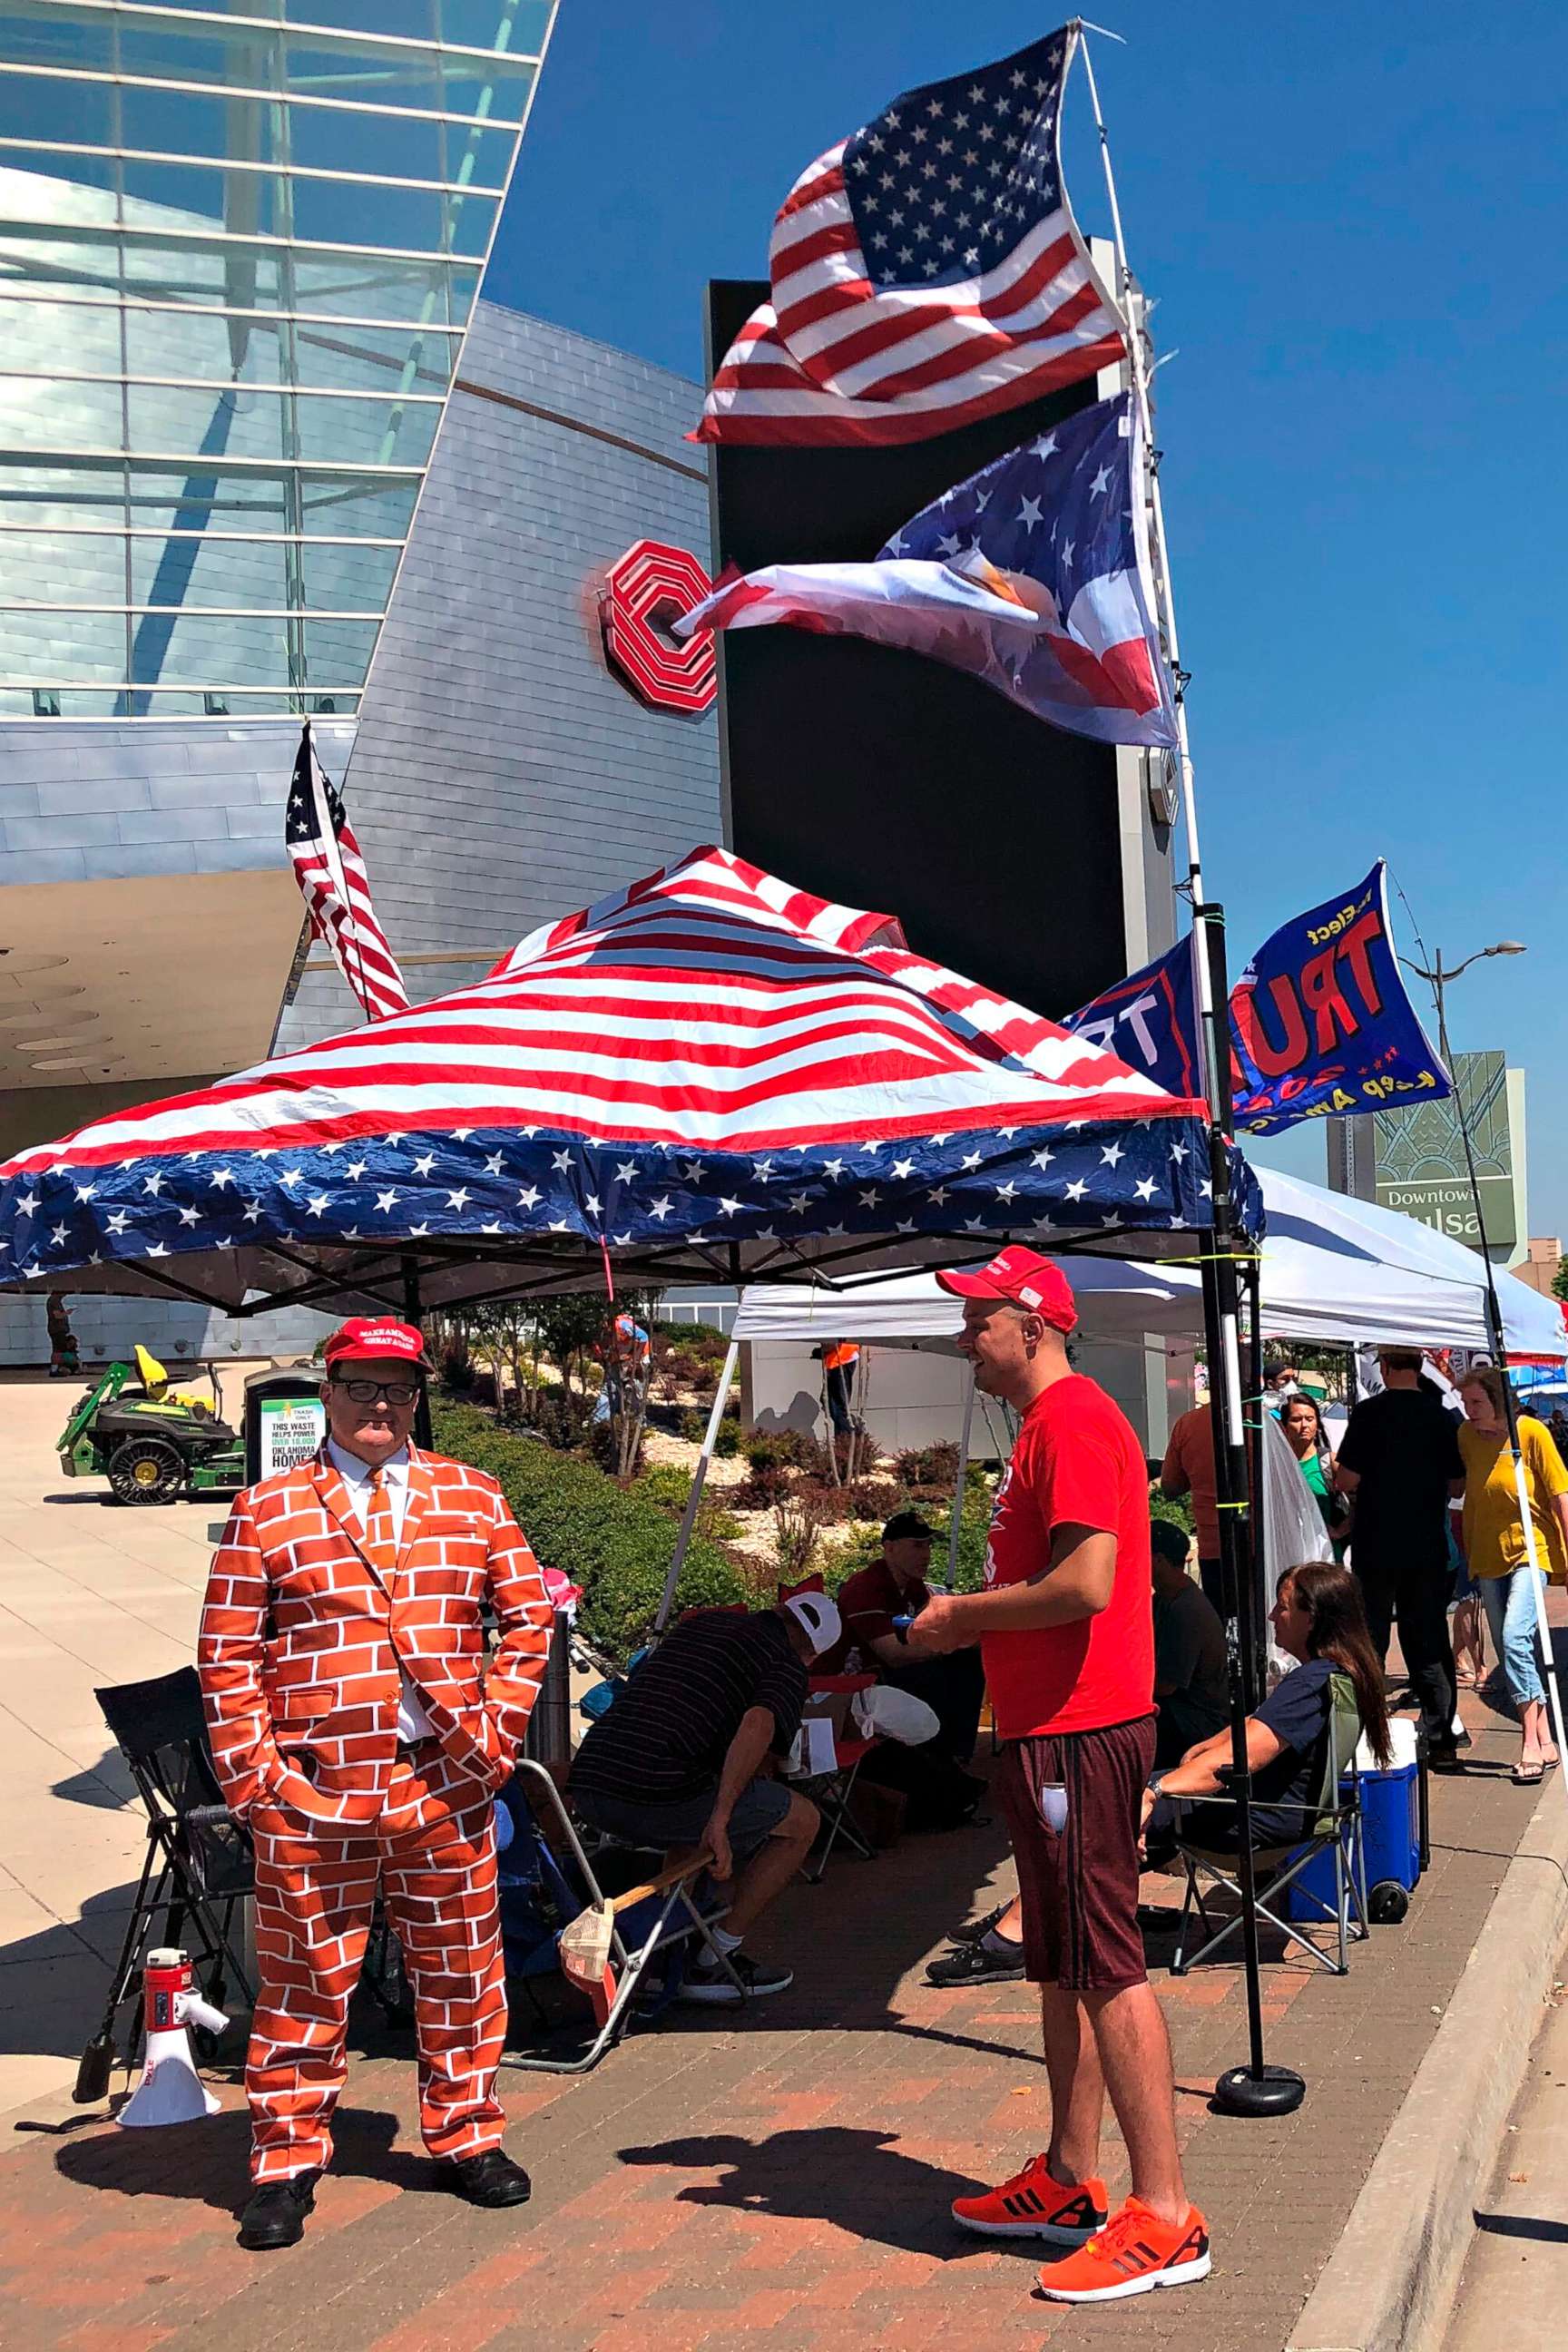 PHOTO: Supporters of President Trump, including a man dressed as the border wall, line up outside outside an arena in Tulsa, Okla., June 18, 2020, where the president will hold his first campaign rally in months on June 20.